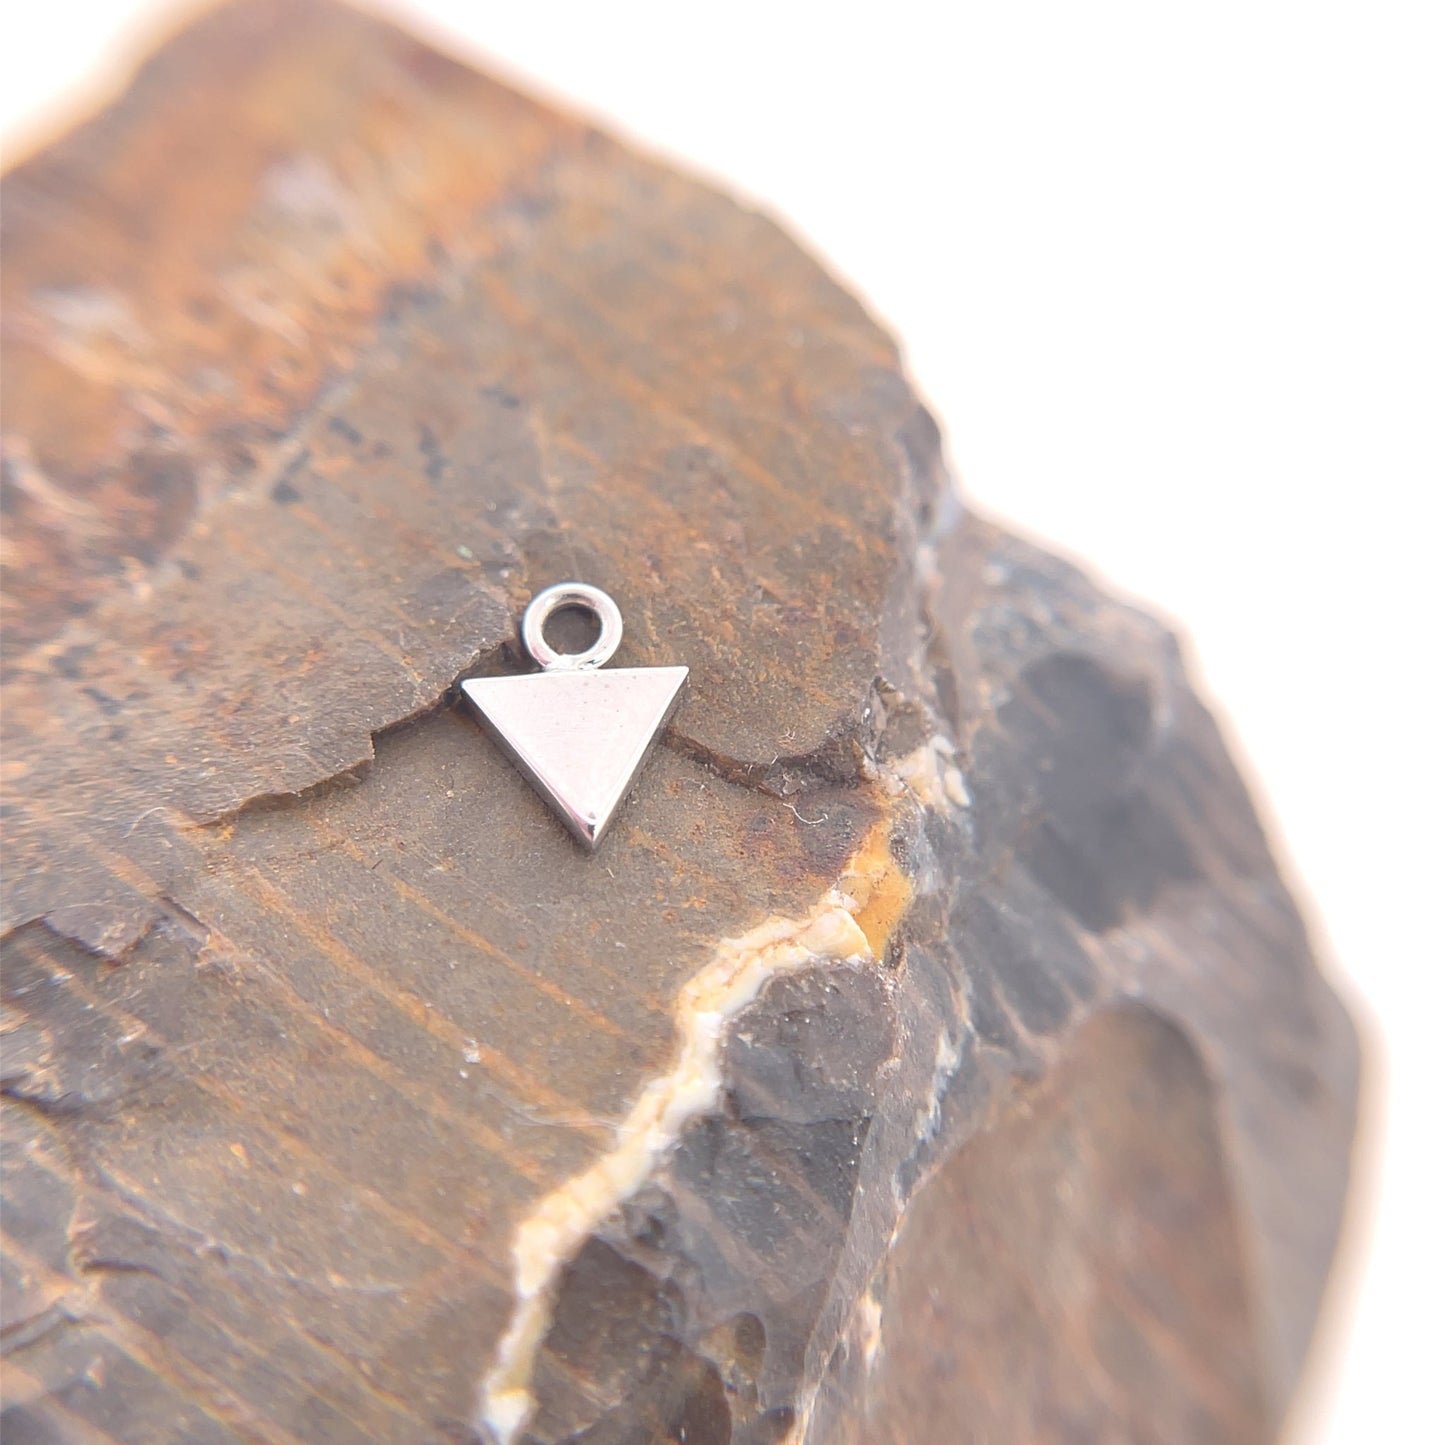 16g Rook Charm with Flat Triangle - Agave in Bloom